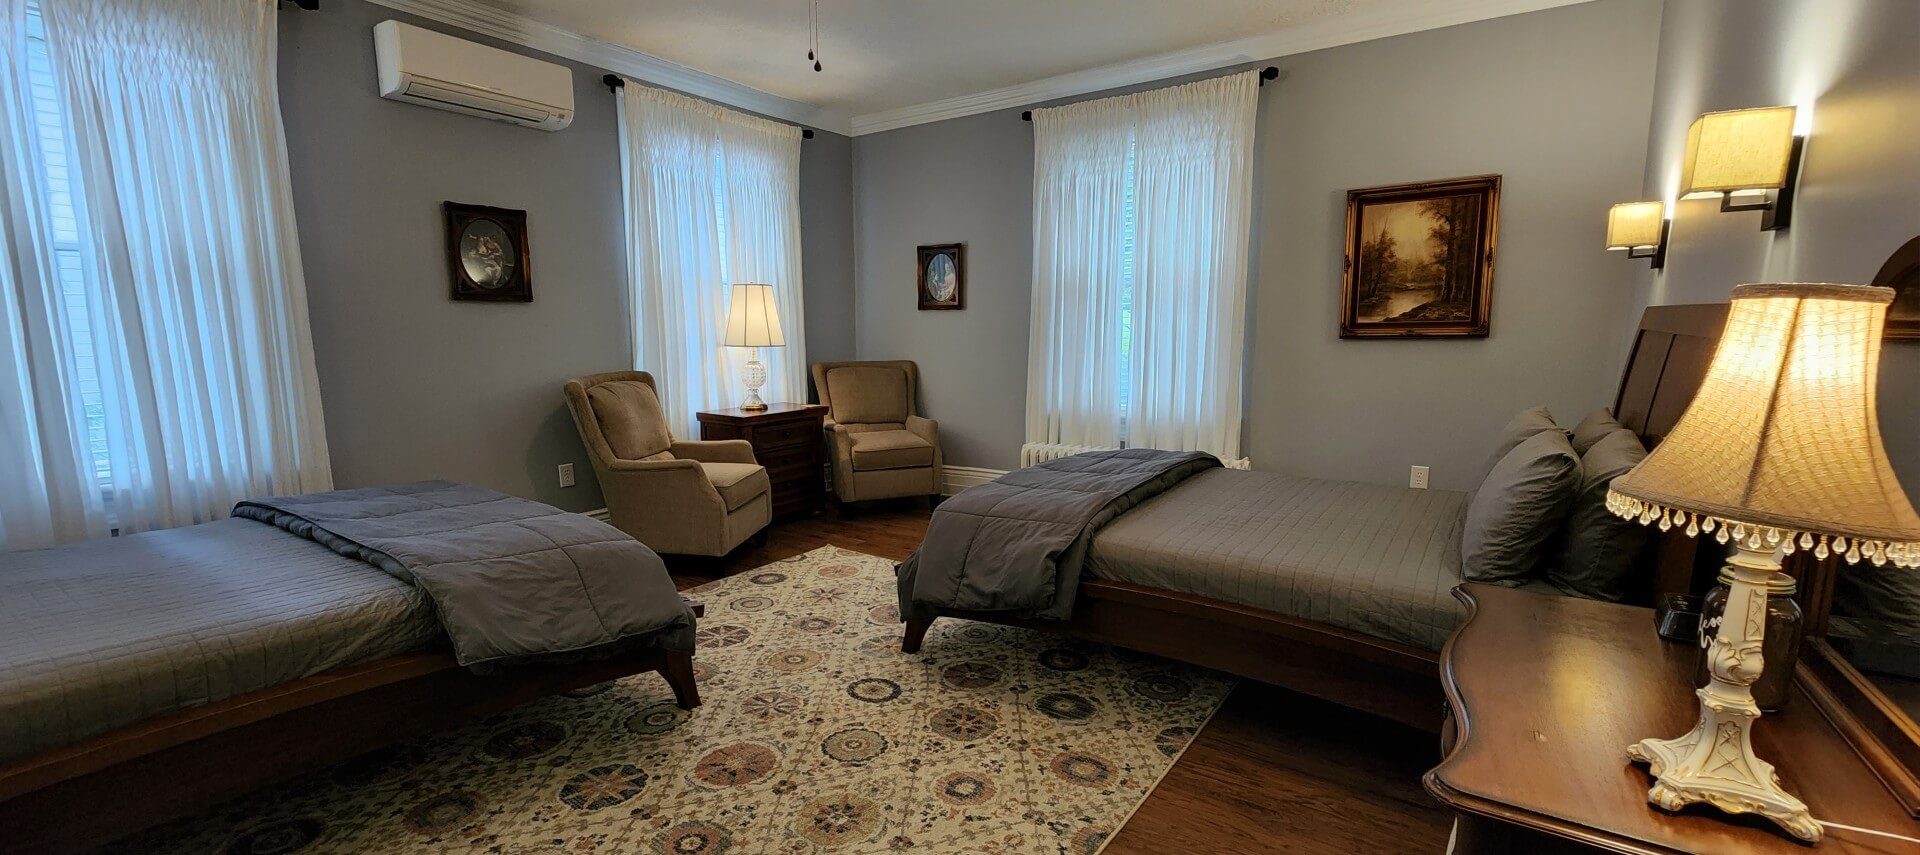 Guest room with two beds in grey linens, two sitting chairs and multiple soft-lit lamps